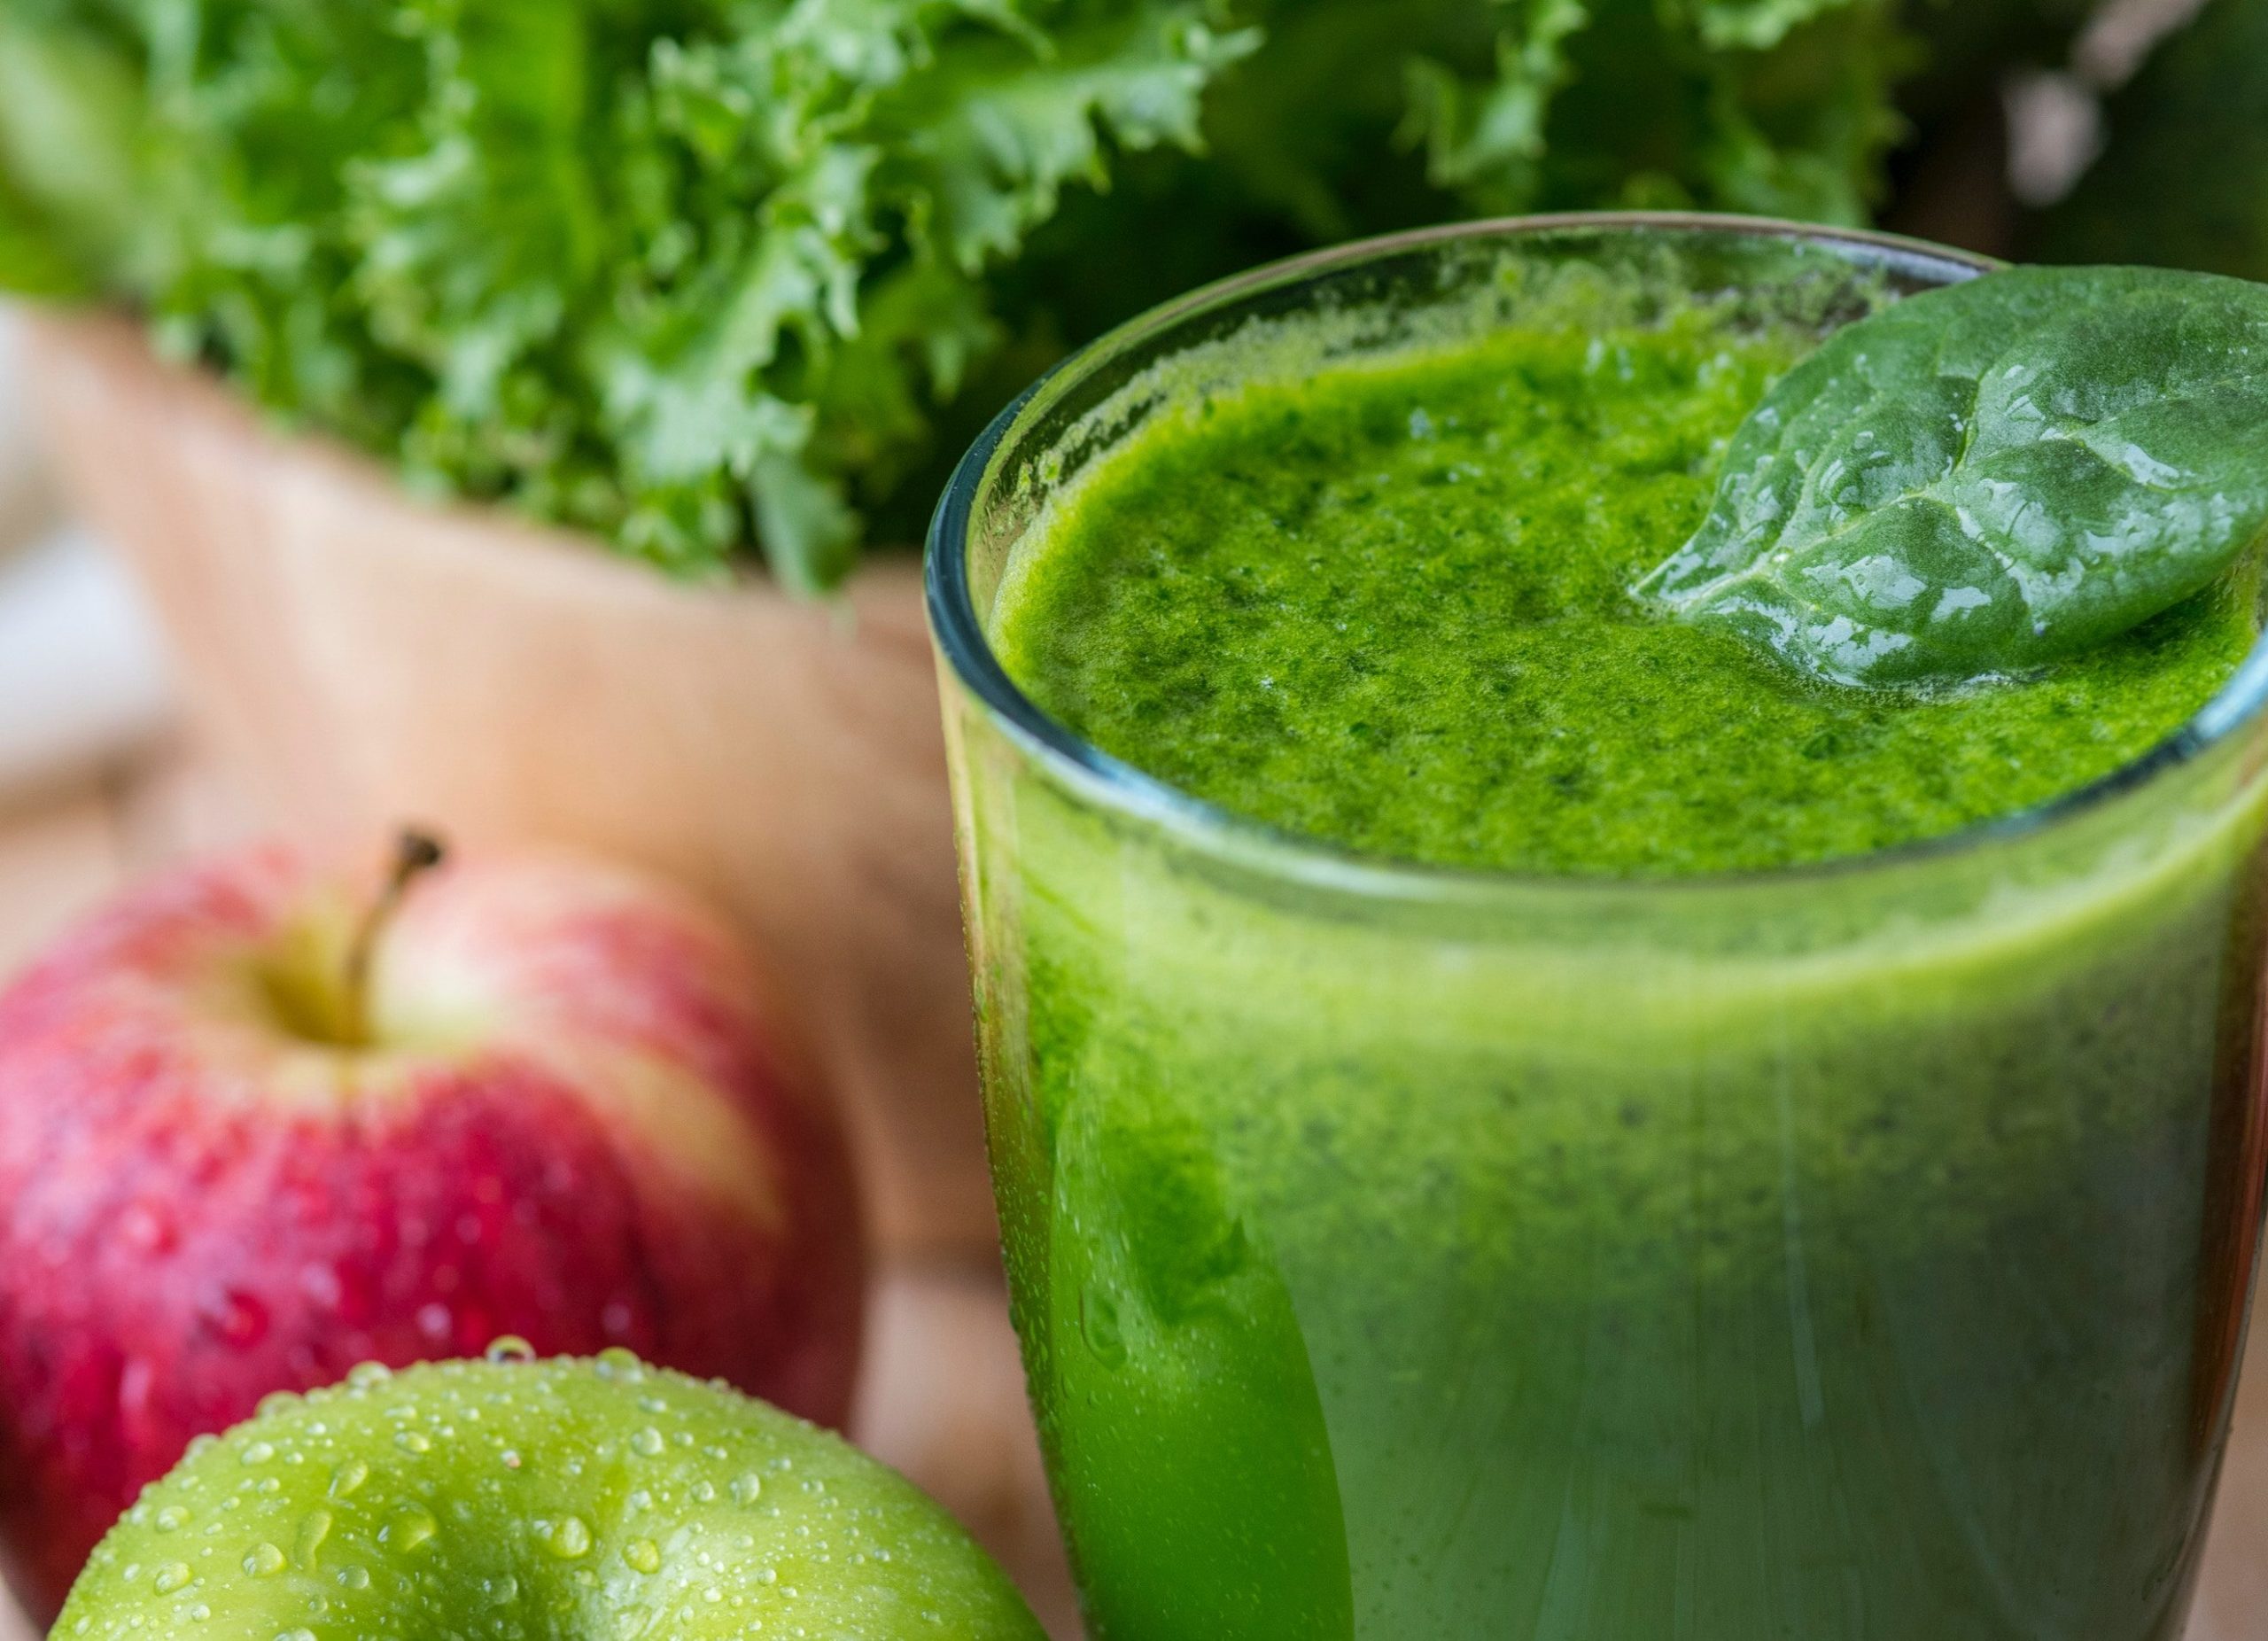 Green smoothie in glass surrounded by fruit.